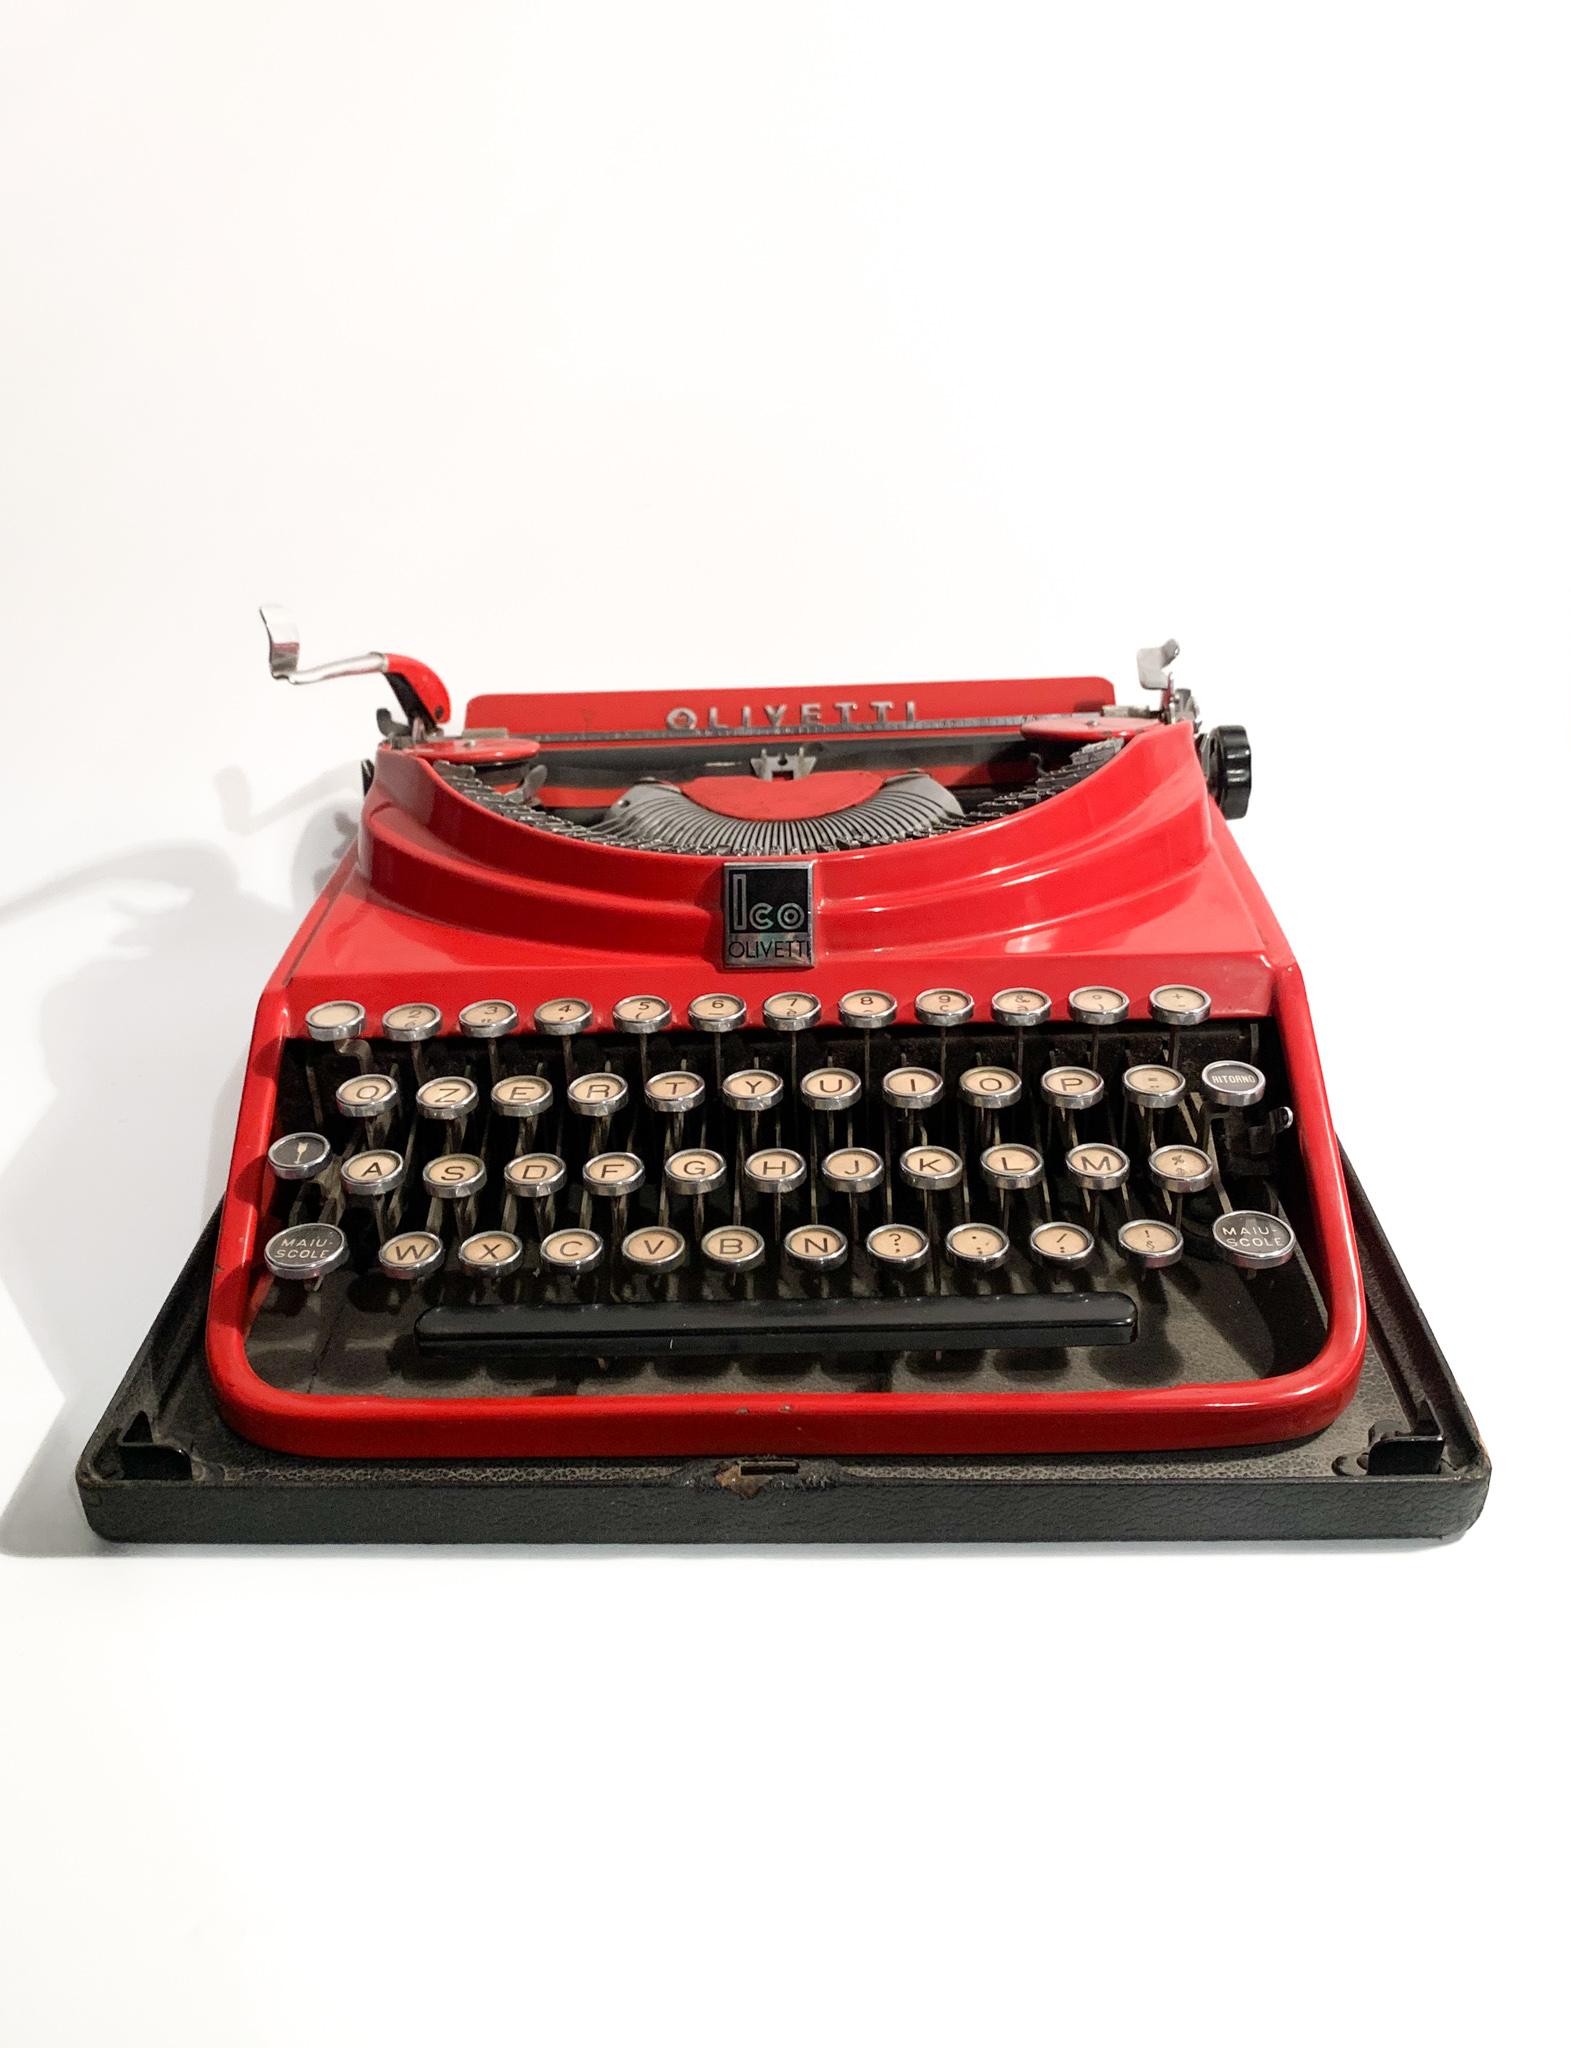 Art Deco Olivetti Red Portable Typewriter Model ICO from 1932